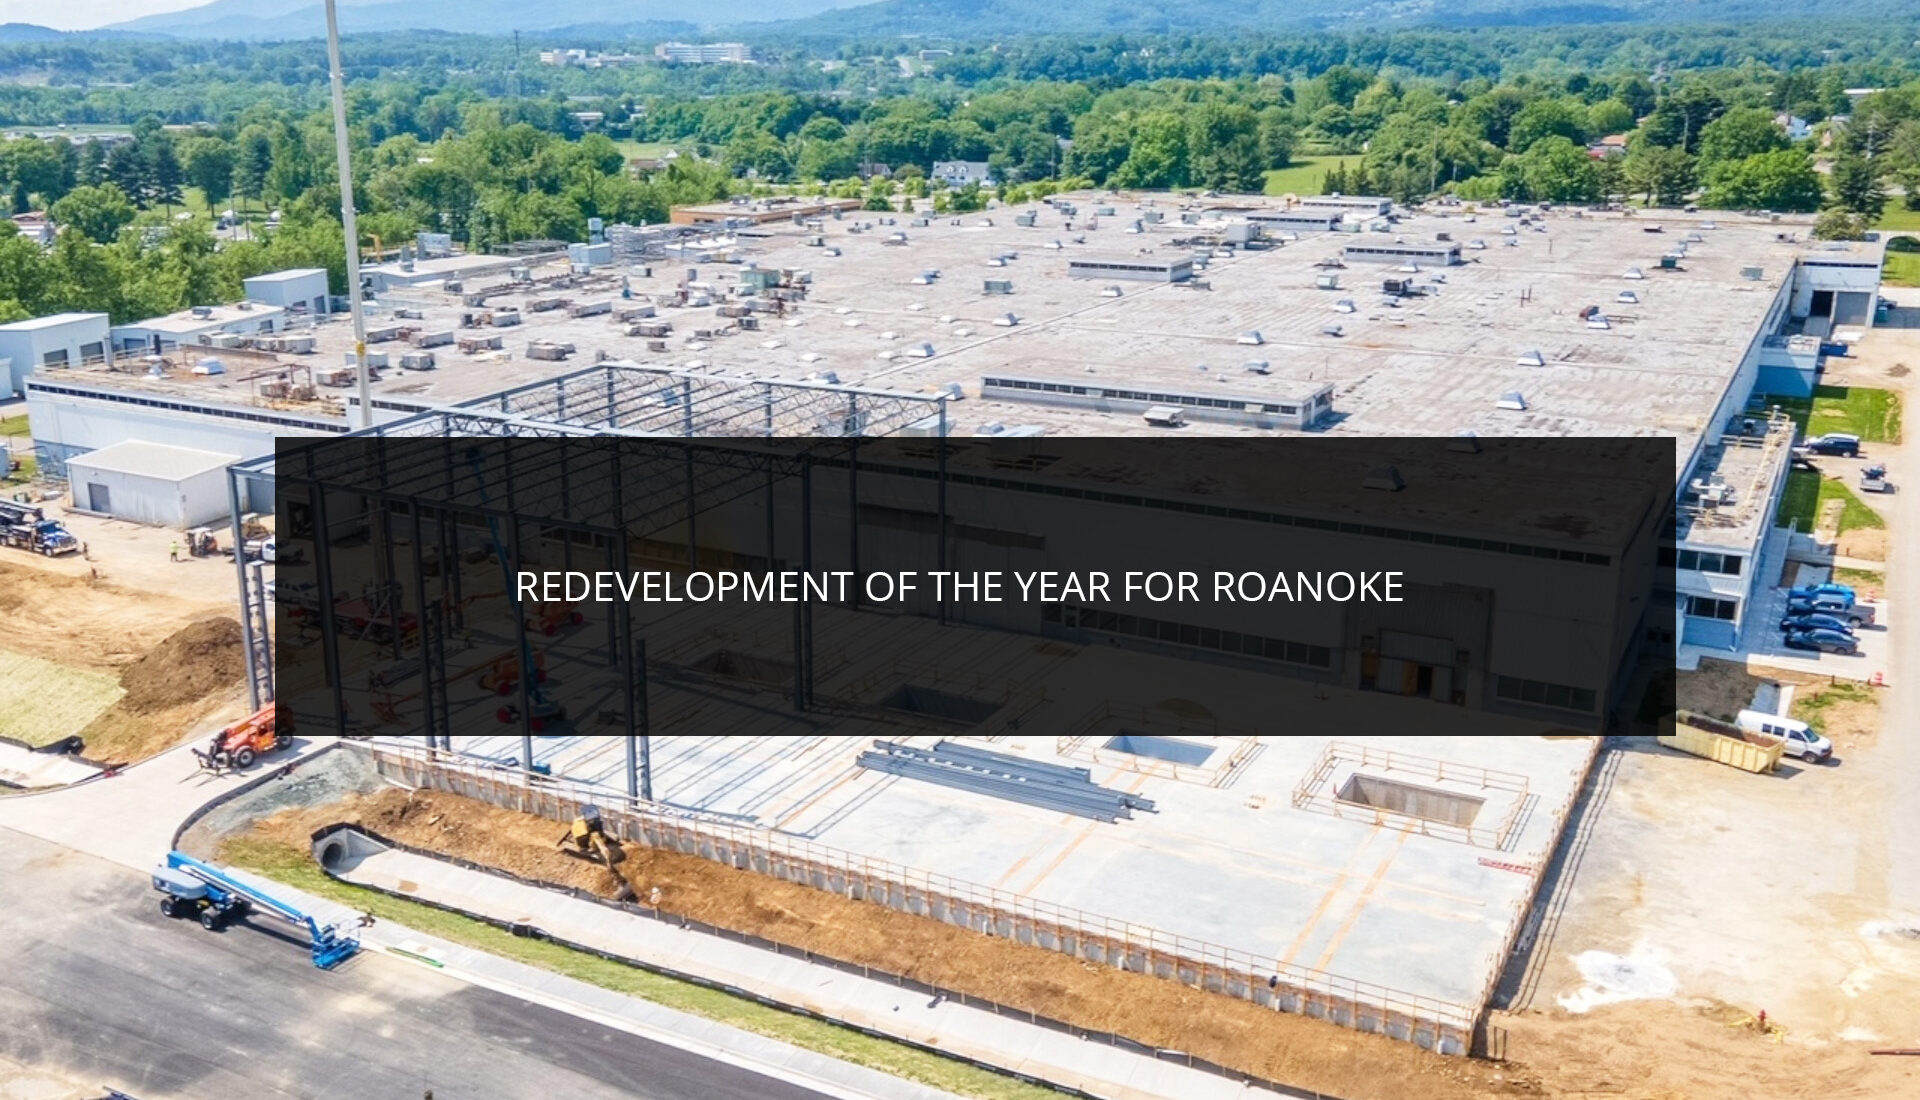 Redevelopment of the Year for Roanoke